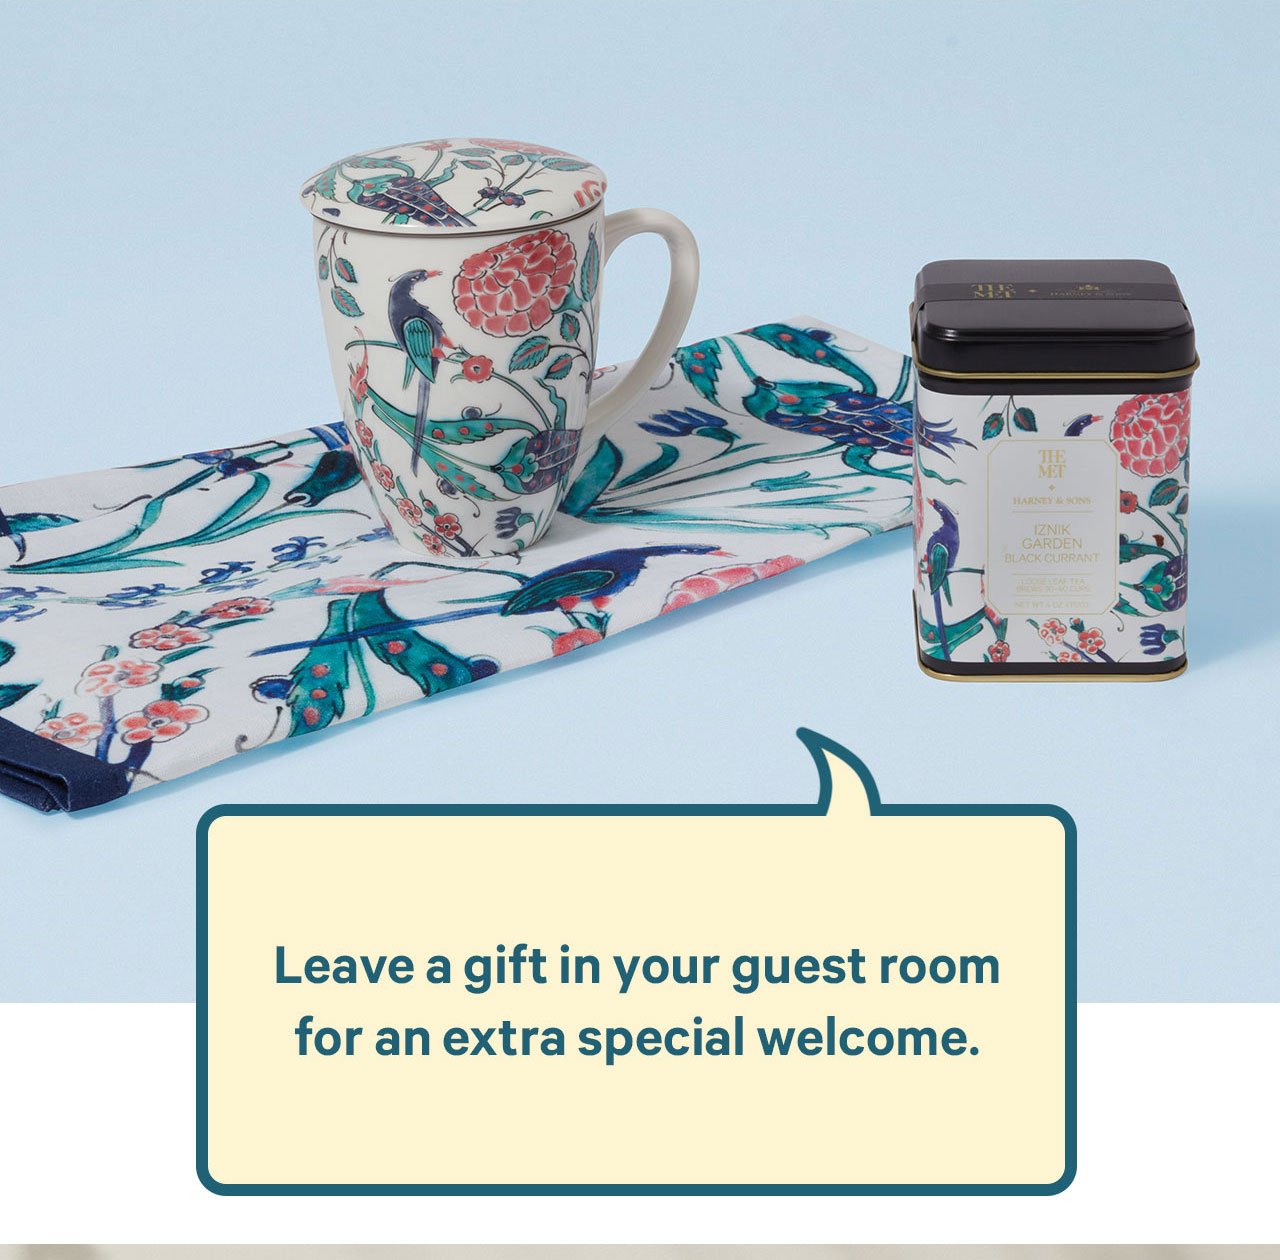 Leave a gift in your guest room for an extra special welcome.